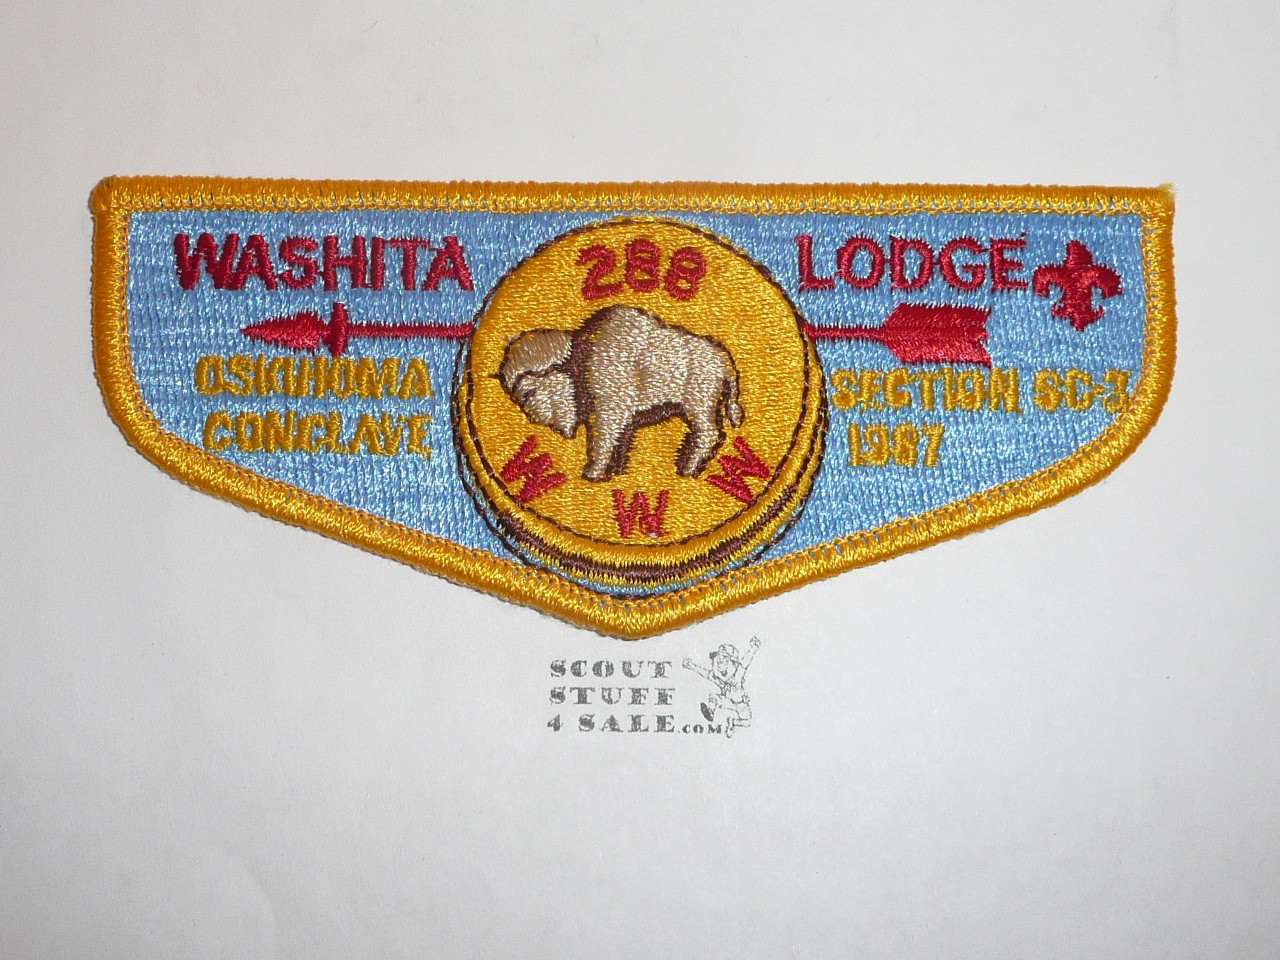 Order of the Arrow Lodge #288 Washita s8 Flap Patch